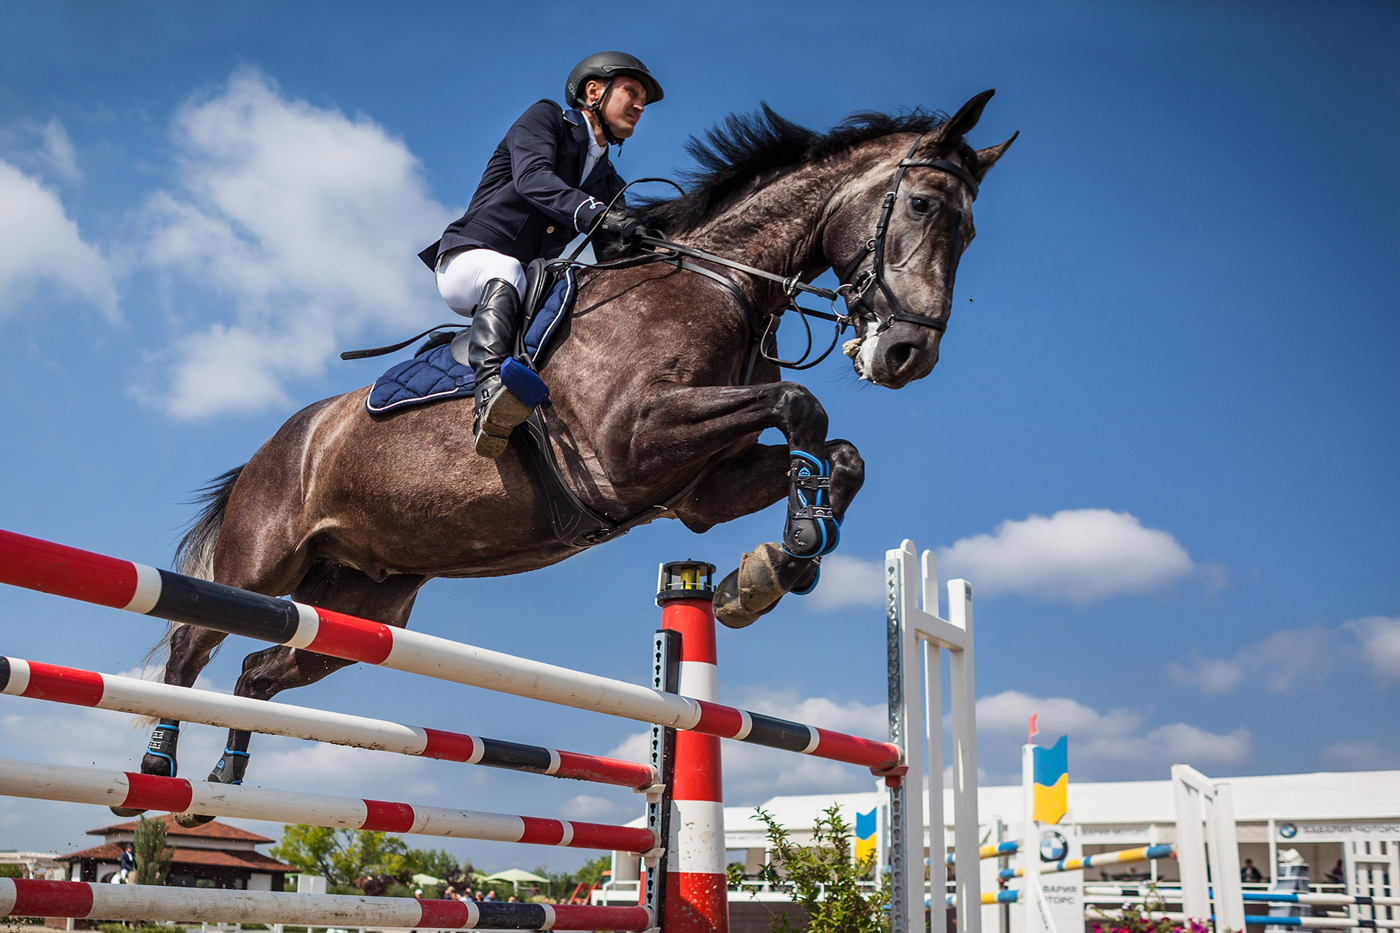 A horse and rider show jumping over a fence